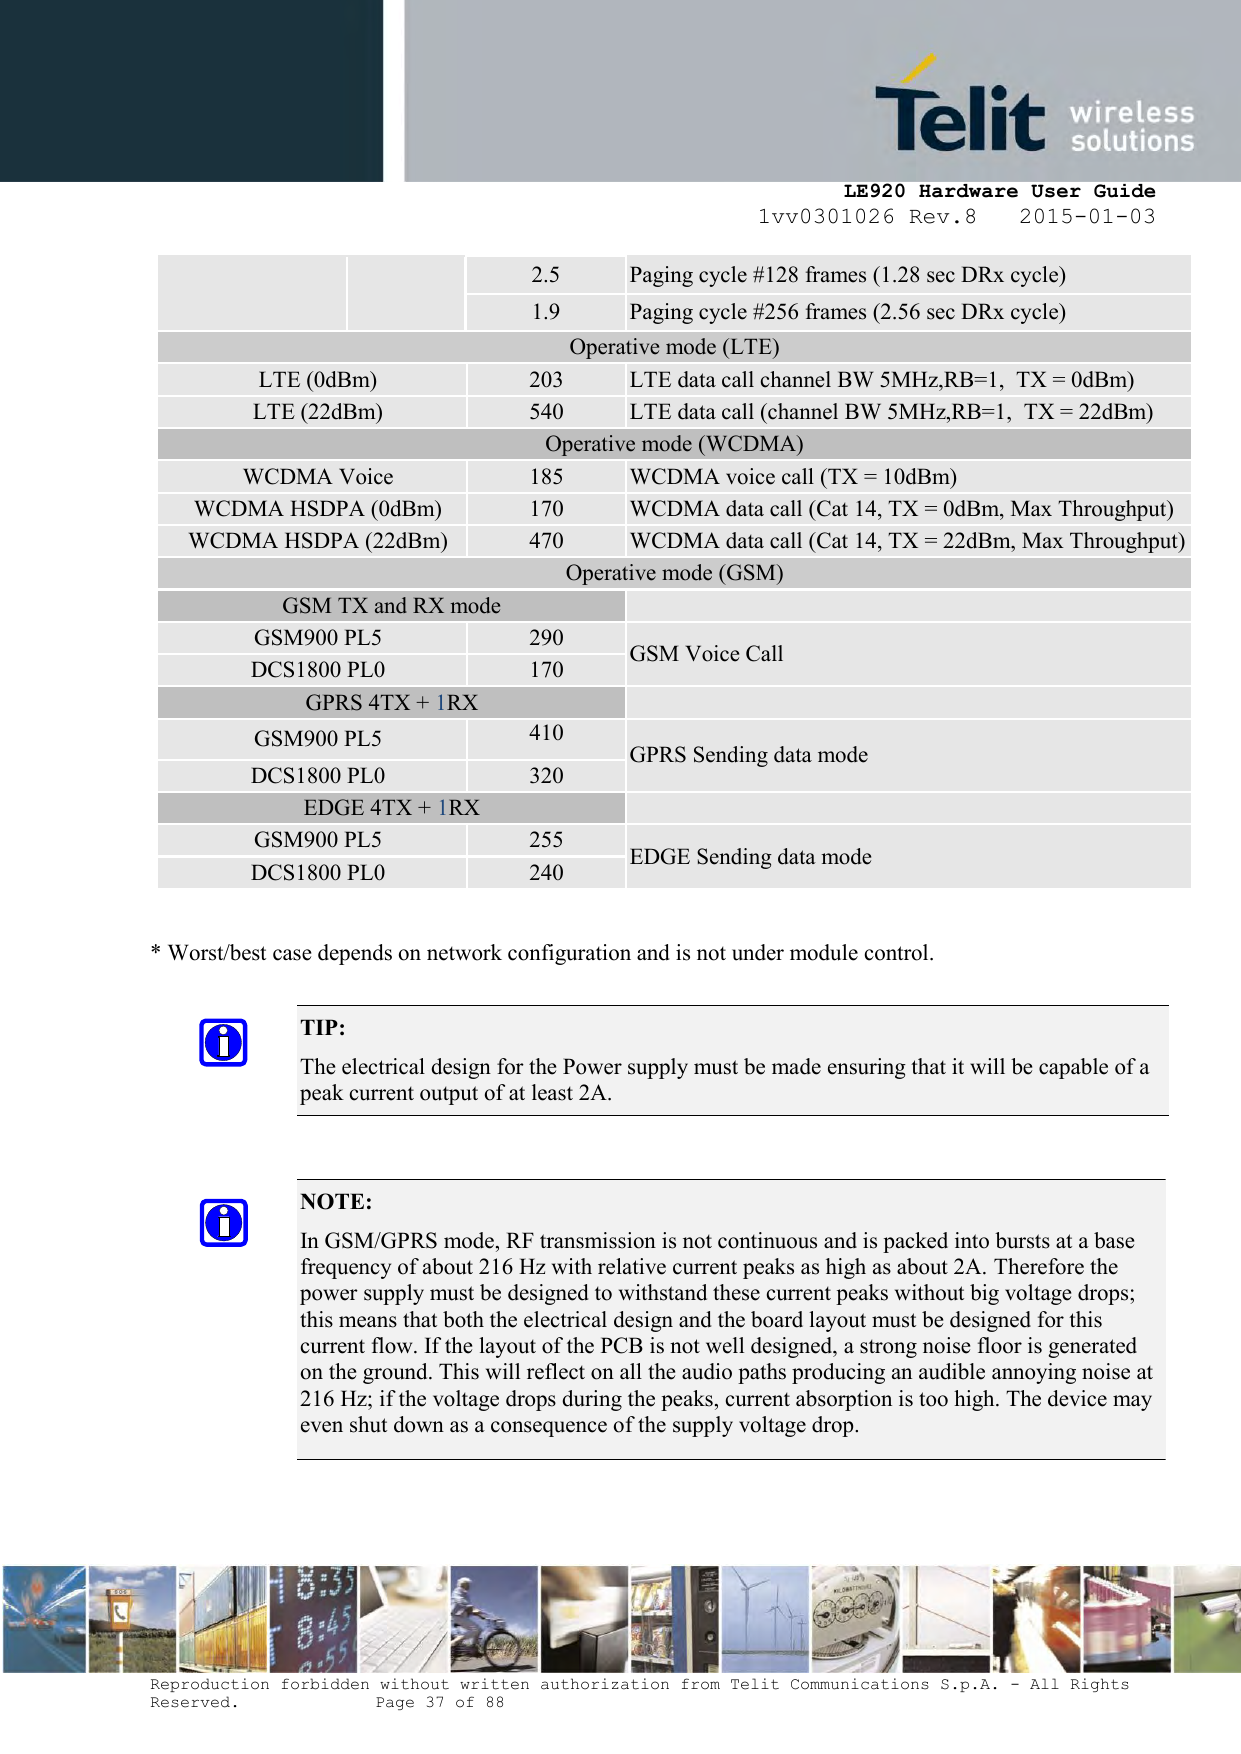     LE920 Hardware User Guide 1vv0301026 Rev.8   2015-01-03 Reproduction forbidden without written authorization from Telit Communications S.p.A. - All Rights Reserved.    Page 37 of 88  2.5 Paging cycle #128 frames (1.28 sec DRx cycle) 1.9 Paging cycle #256 frames (2.56 sec DRx cycle) Operative mode (LTE) LTE (0dBm) 203 LTE data call channel BW 5MHz,RB=1,  TX = 0dBm) LTE (22dBm) 540 LTE data call (channel BW 5MHz,RB=1,  TX = 22dBm) Operative mode (WCDMA) WCDMA Voice 185 WCDMA voice call (TX = 10dBm) WCDMA HSDPA (0dBm) 170 WCDMA data call (Cat 14, TX = 0dBm, Max Throughput) WCDMA HSDPA (22dBm) 470 WCDMA data call (Cat 14, TX = 22dBm, Max Throughput) Operative mode (GSM) GSM TX and RX mode  GSM900 PL5 290 GSM Voice Call DCS1800 PL0 170 GPRS 4TX + 1RX  GSM900 PL5 410 GPRS Sending data mode DCS1800 PL0 320 EDGE 4TX + 1RX  GSM900 PL5 255 EDGE Sending data mode DCS1800 PL0 240       * Worst/best case depends on network configuration and is not under module control.  TIP:  The electrical design for the Power supply must be made ensuring that it will be capable of a peak current output of at least 2A.  NOTE: In GSM/GPRS mode, RF transmission is not continuous and is packed into bursts at a base frequency of about 216 Hz with relative current peaks as high as about 2A. Therefore the power supply must be designed to withstand these current peaks without big voltage drops; this means that both the electrical design and the board layout must be designed for this current flow. If the layout of the PCB is not well designed, a strong noise floor is generated on the ground. This will reflect on all the audio paths producing an audible annoying noise at 216 Hz; if the voltage drops during the peaks, current absorption is too high. The device may even shut down as a consequence of the supply voltage drop.  